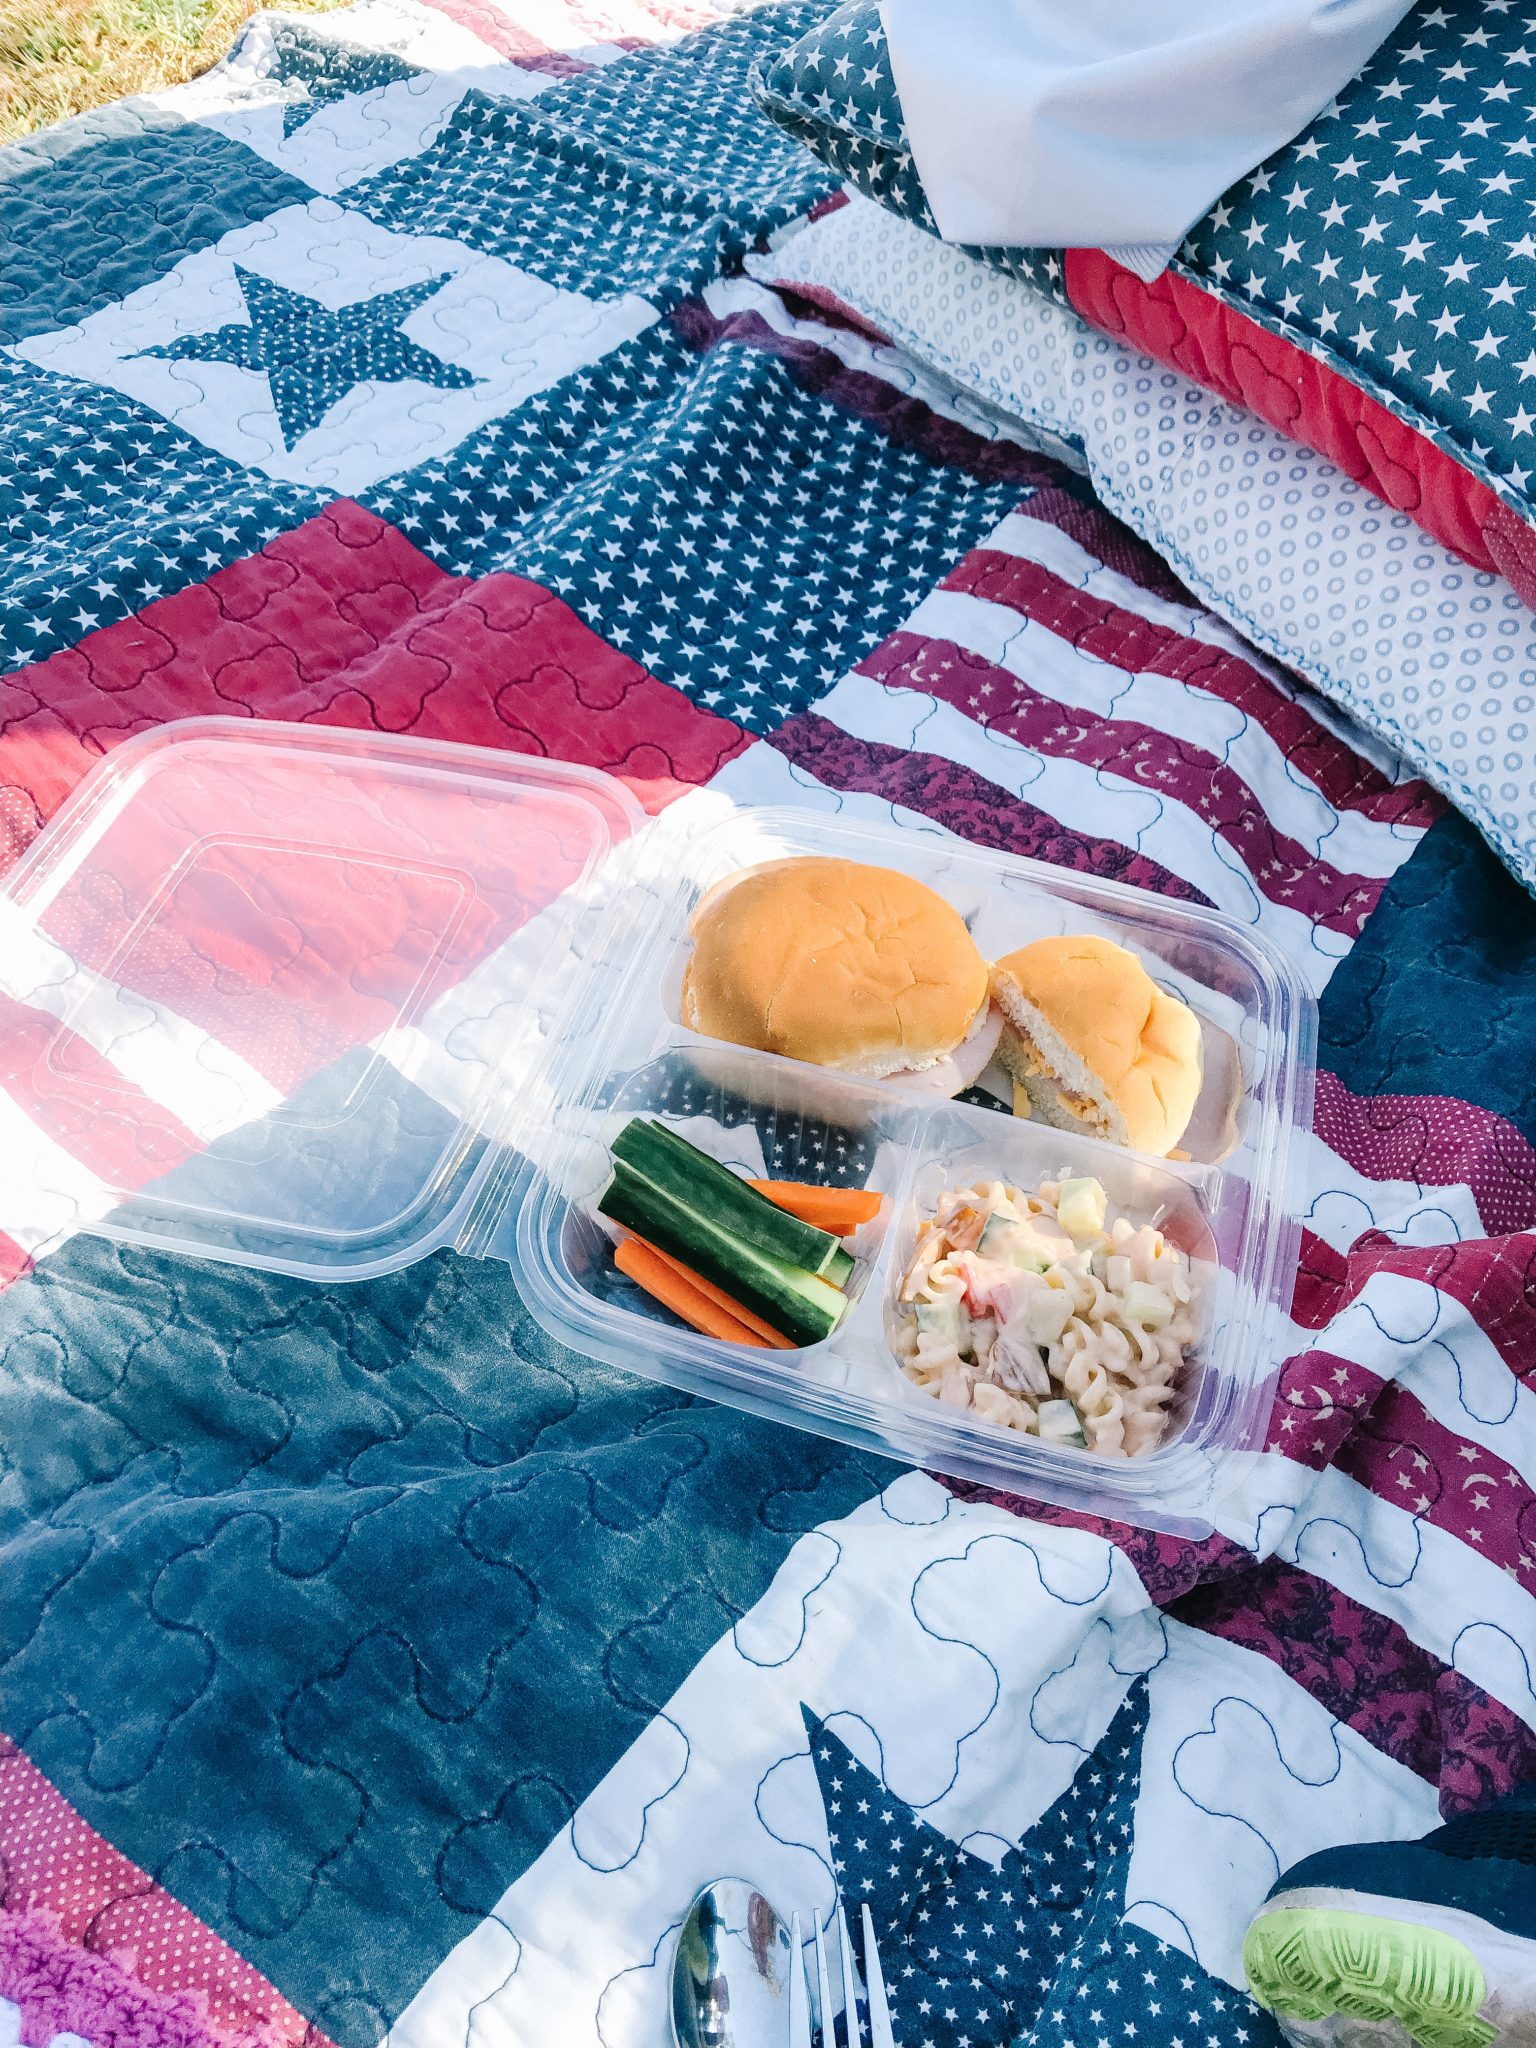 Picnic blanket for your pretty perfect picnic